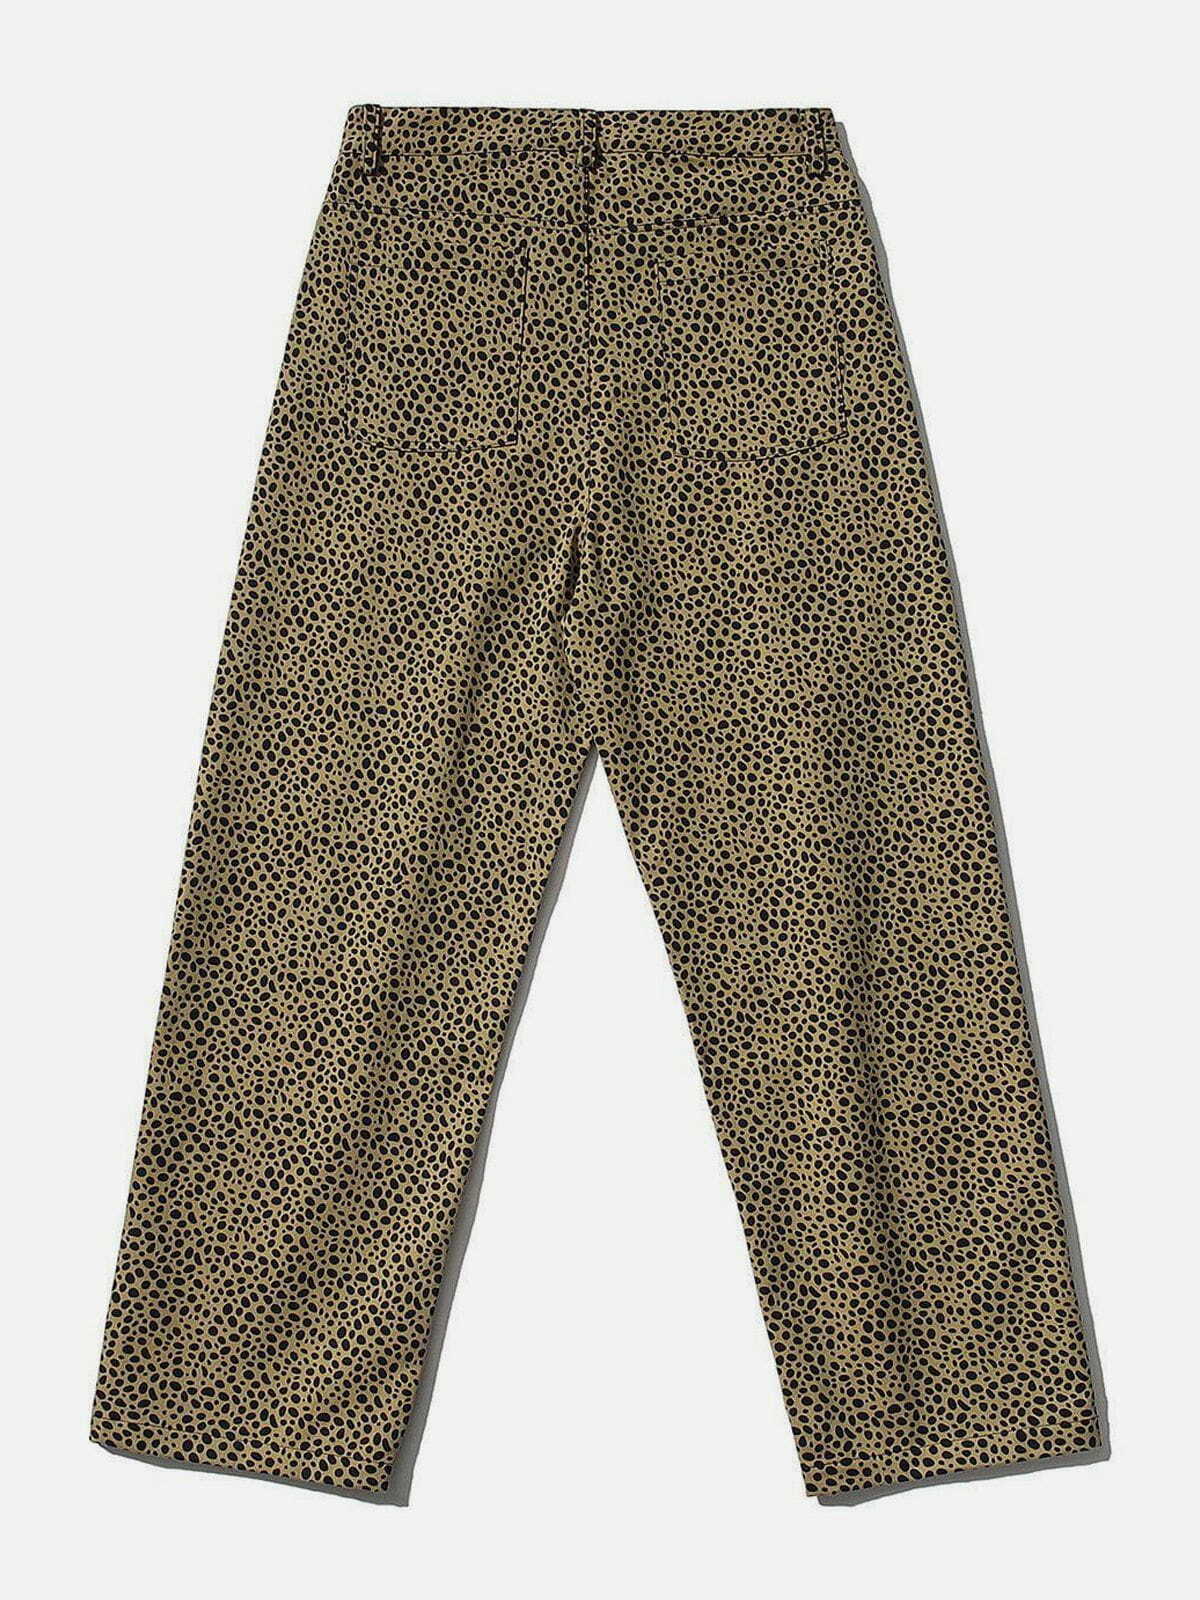 leopard print highwaisted wide pants vintage chic & edgy streetwear 2114